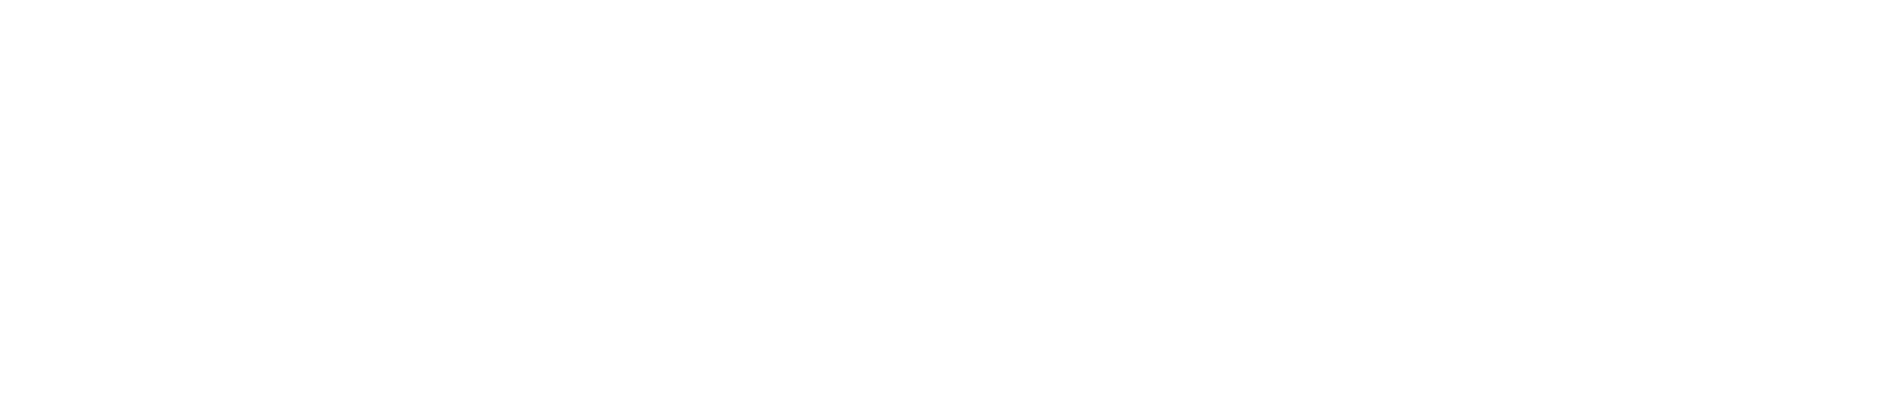 Toll Brothers Apartment Living logo in white